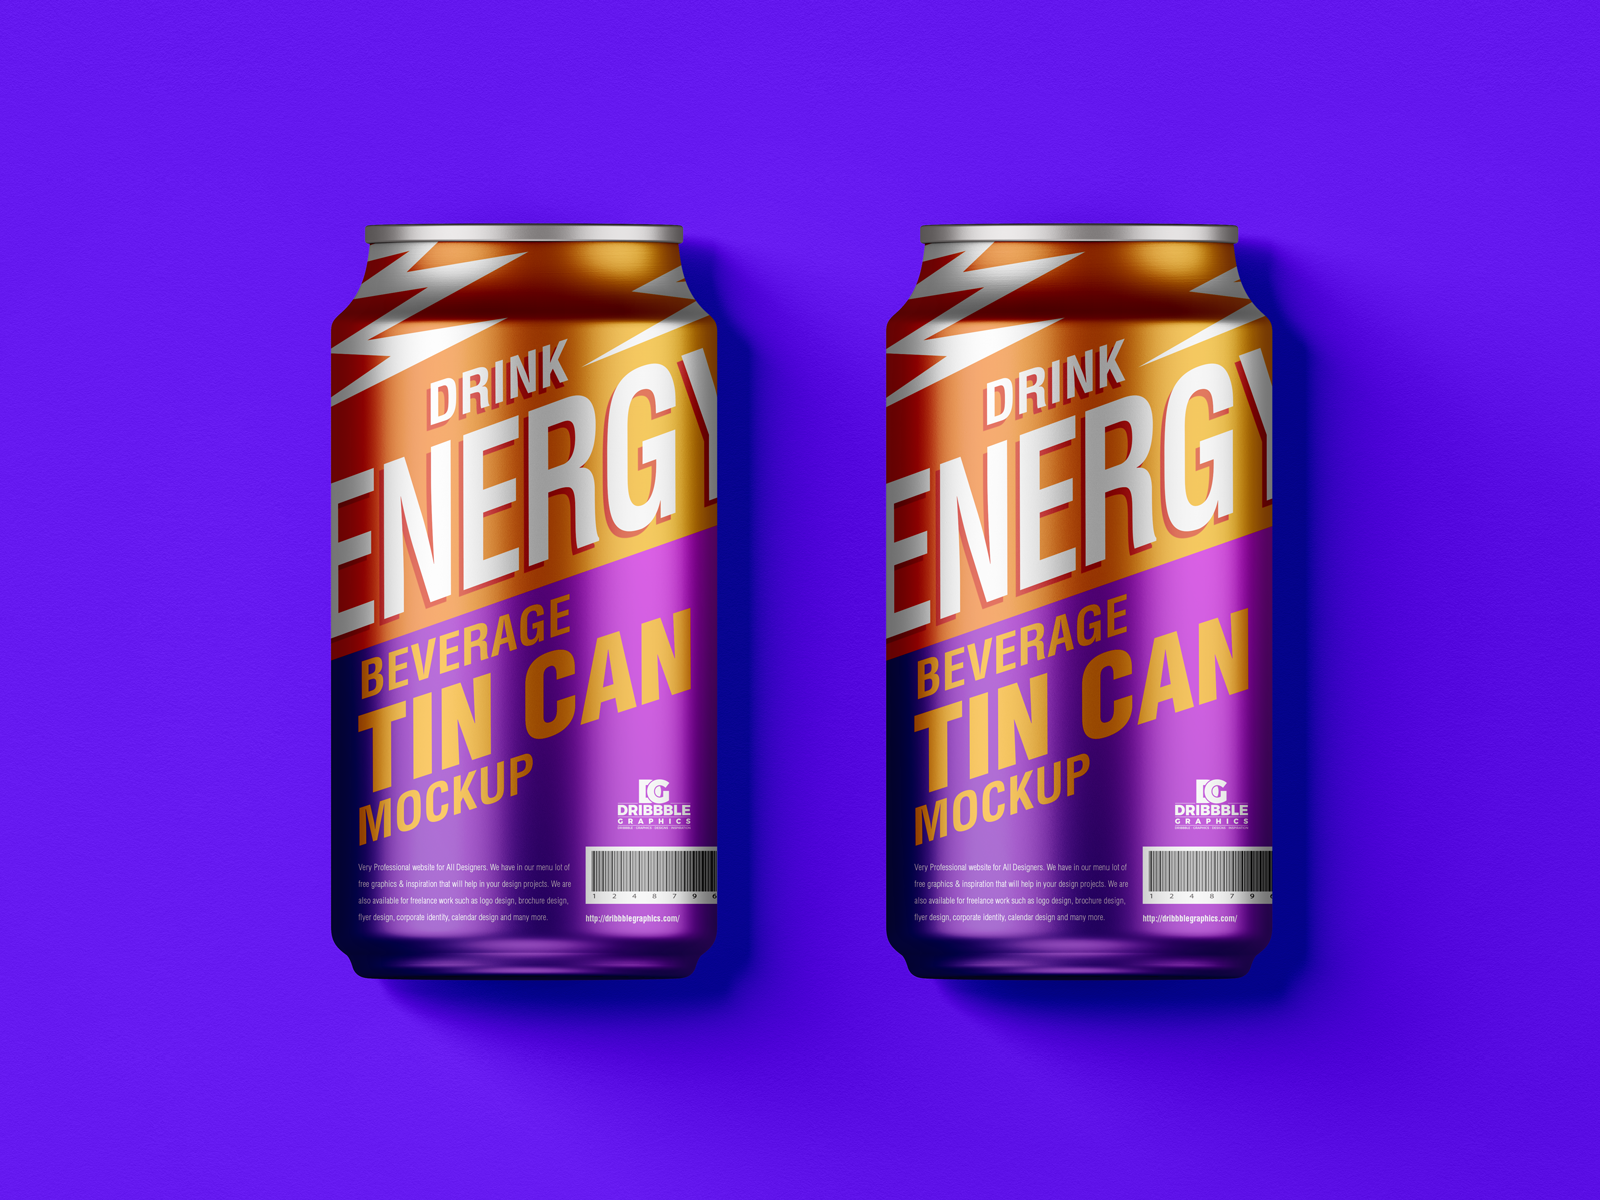 Download Free Beverage Tin Cans Mockup by Jessica Elle on Dribbble